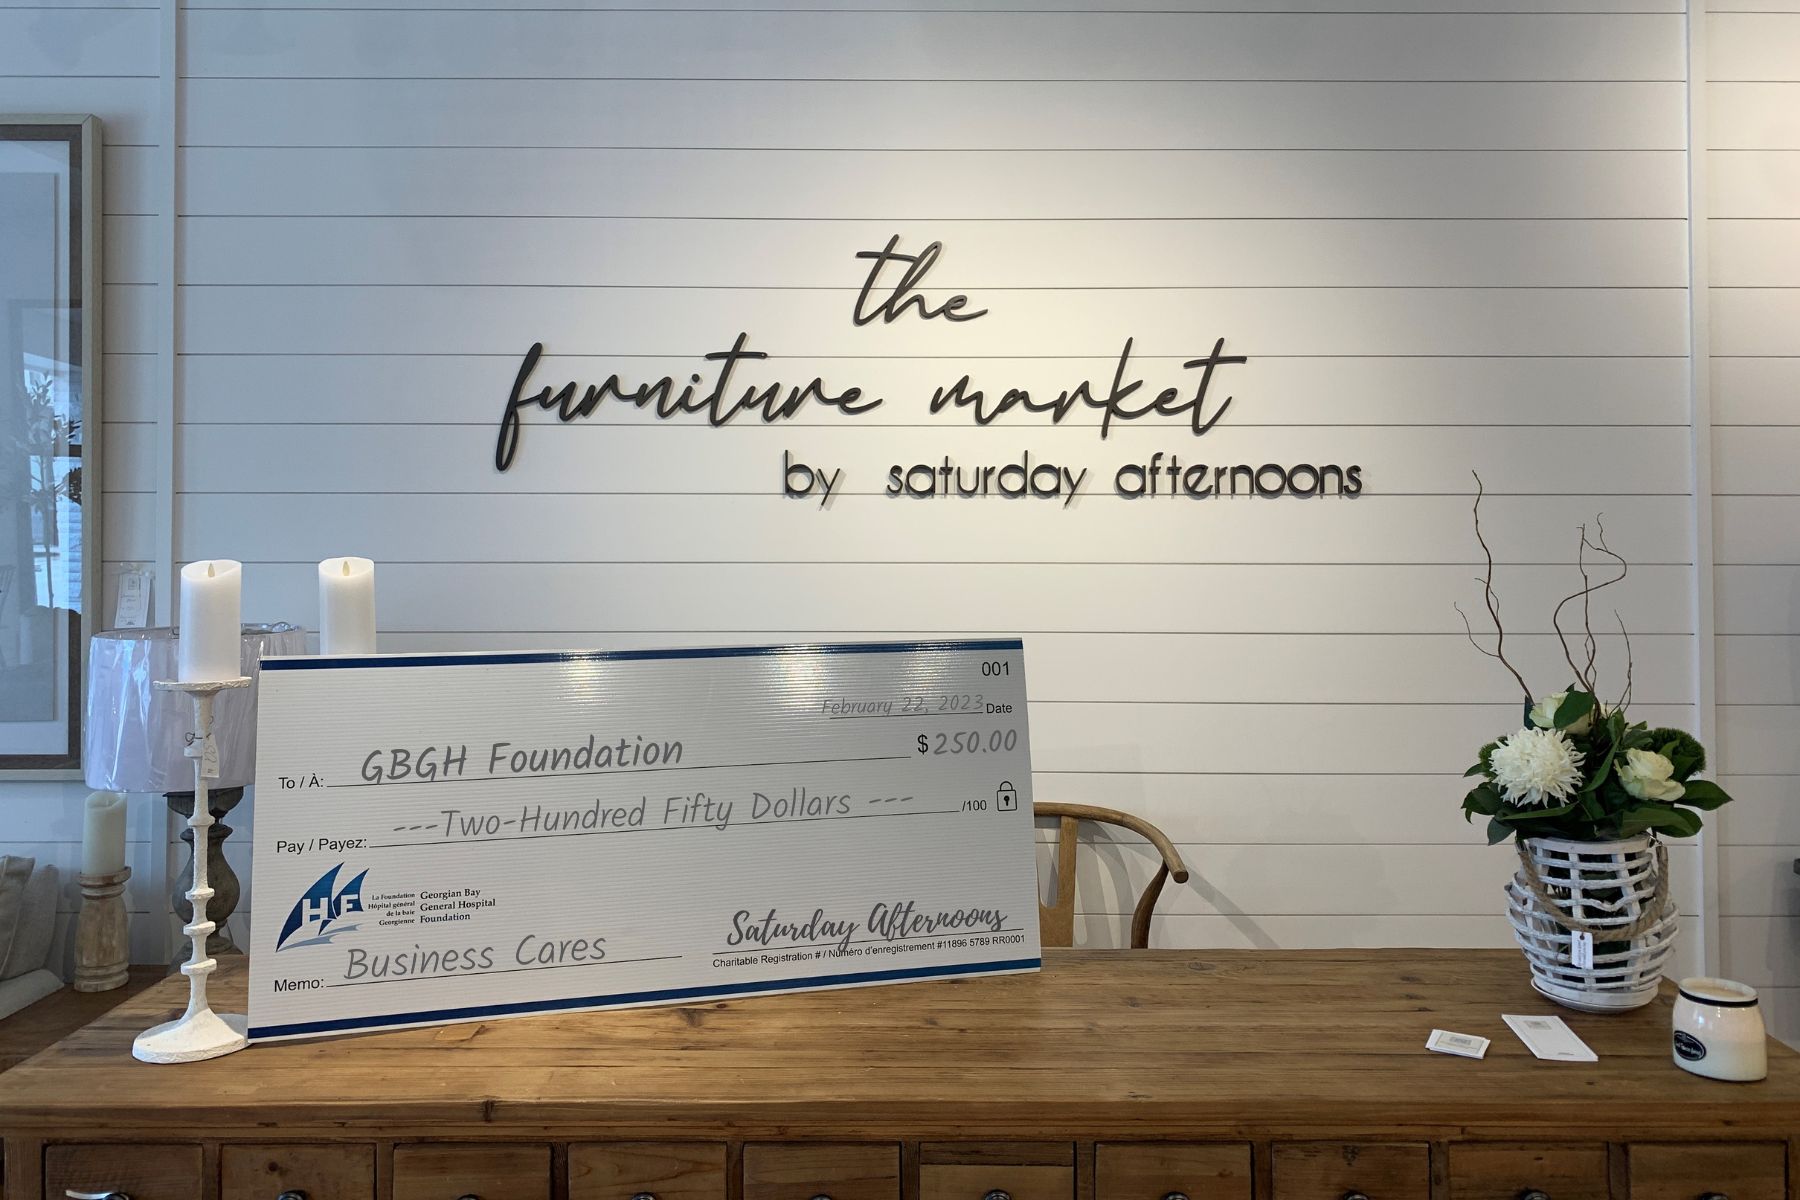 A giant cheque sits on a wooden table. The white wall behind has the words The furniture market by saturday afternoons. The cheque is made out to GBGH Business Cares for $250 from Saturday Afternoons